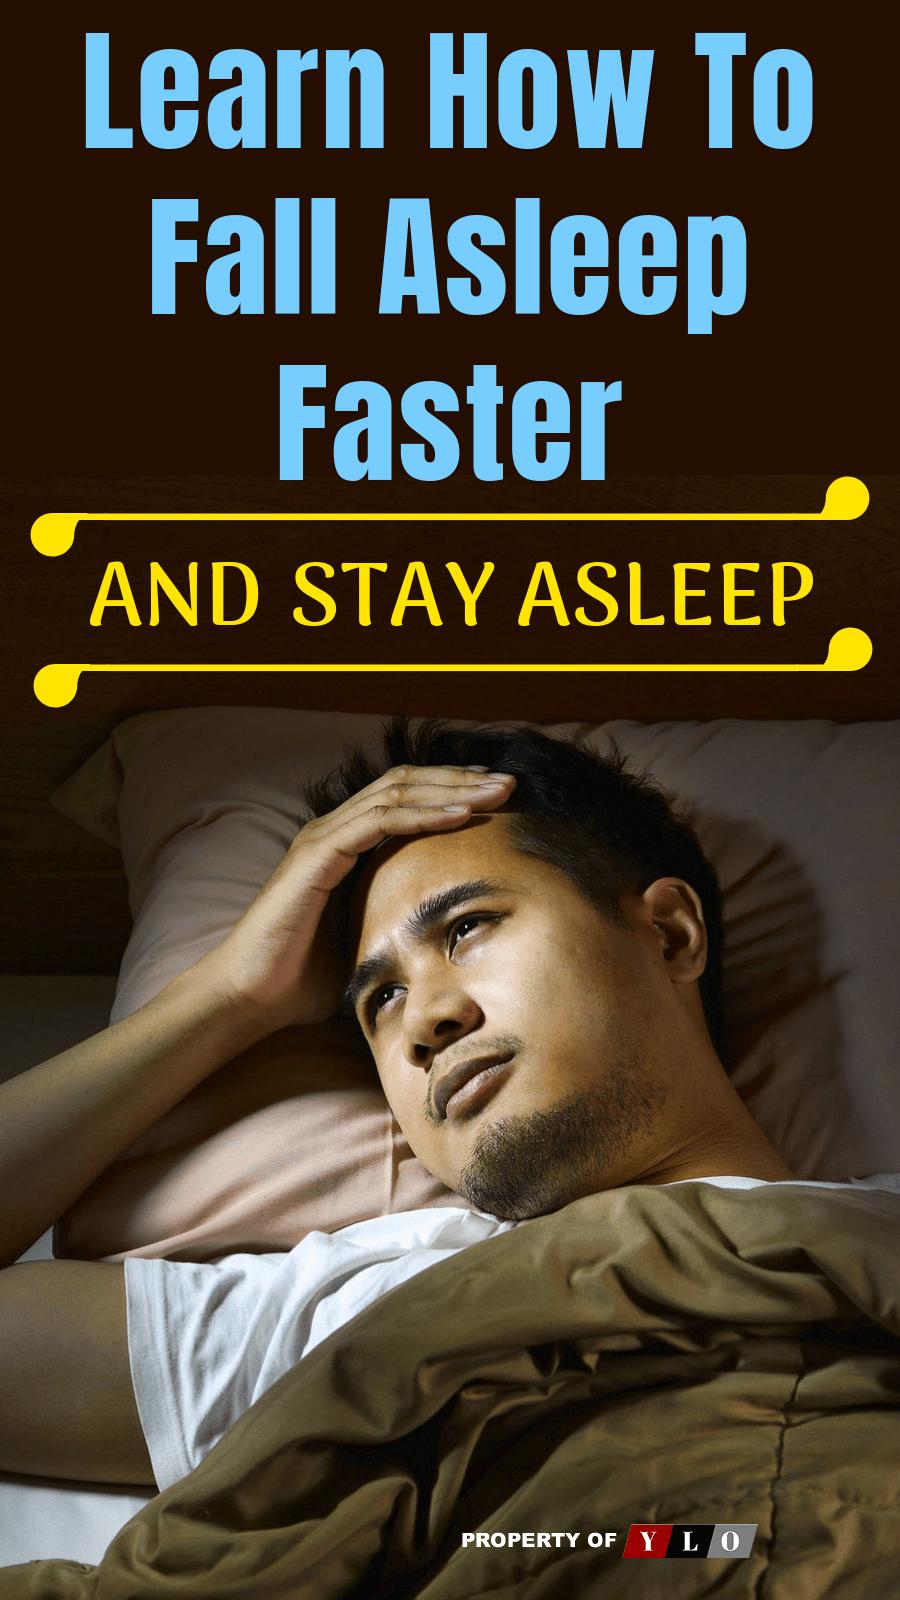 How To Fall Asleep Faster And Stay Asleep Your Lifestyle Options